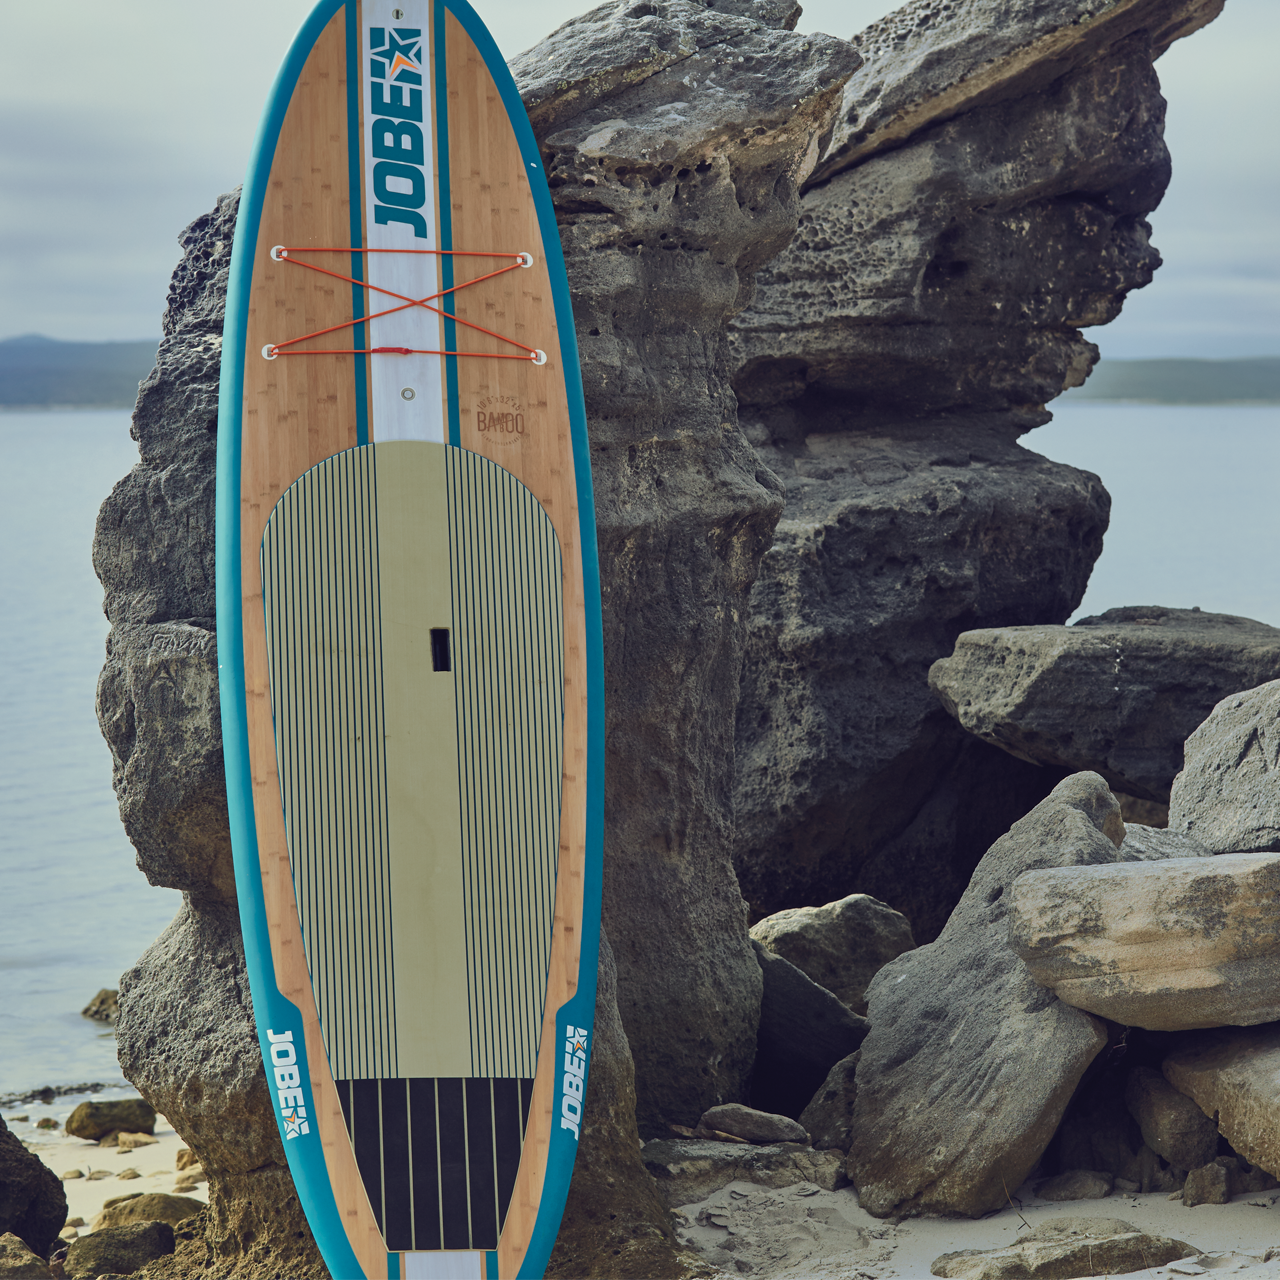 The new 2016 bamboo 10.6 SUP